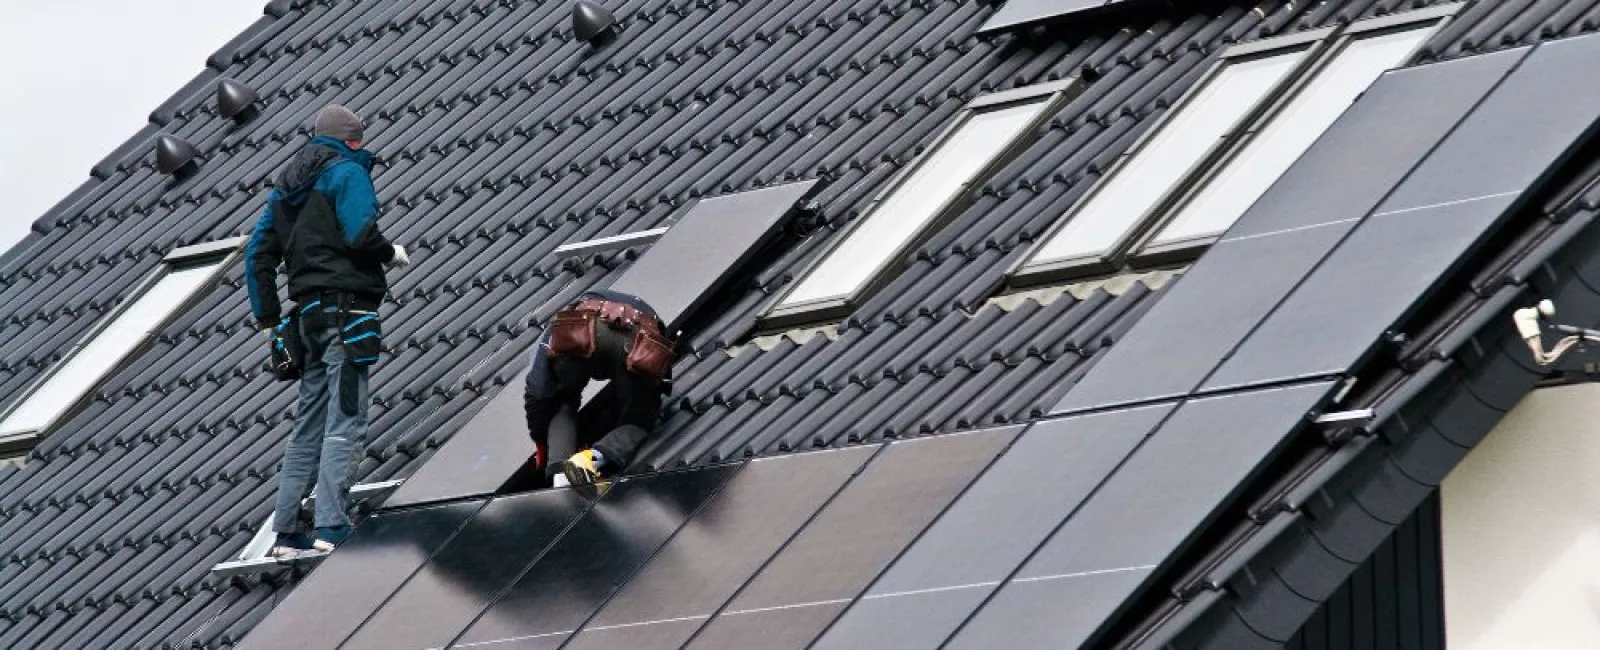 What Is the Best Time of Year To Install Solar Panels?